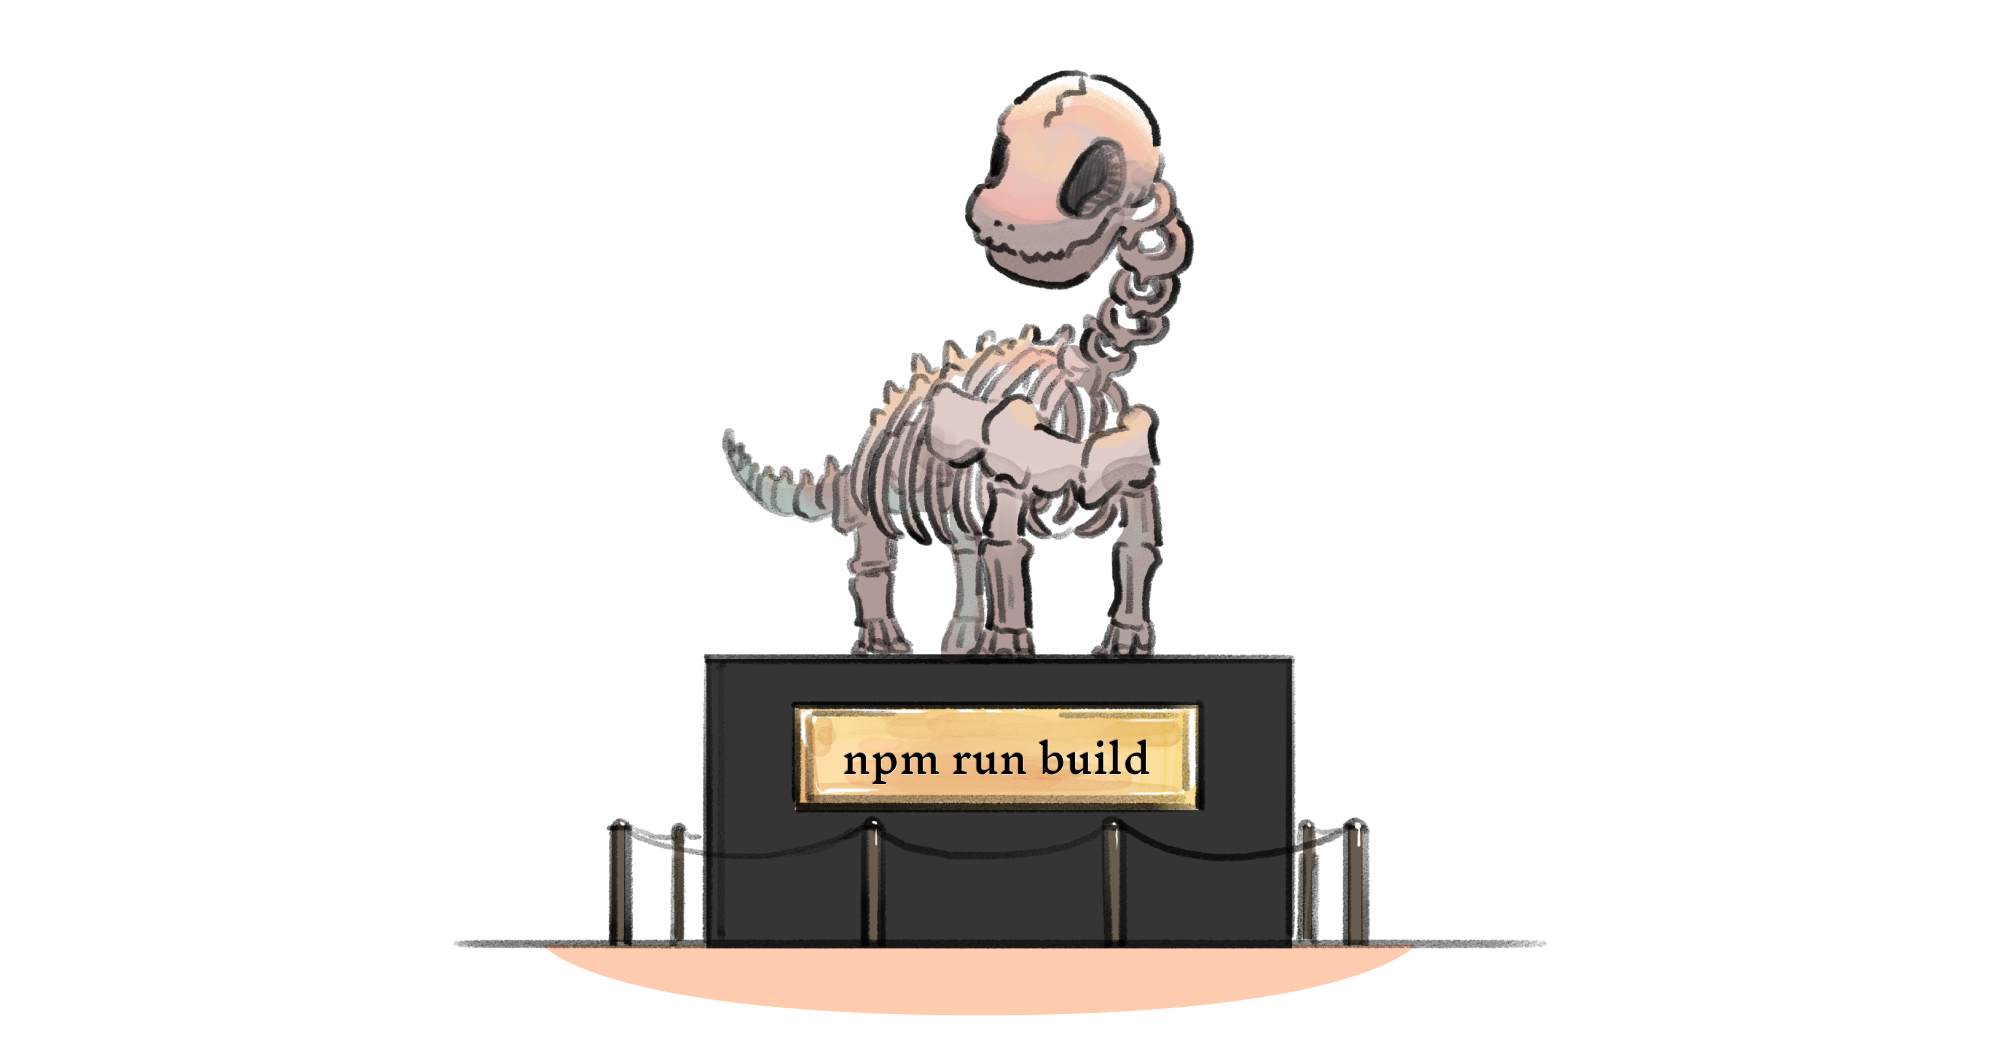 A fossililzed dinosaur skeleton in a museum with a plaque that reads 'npm run build'.